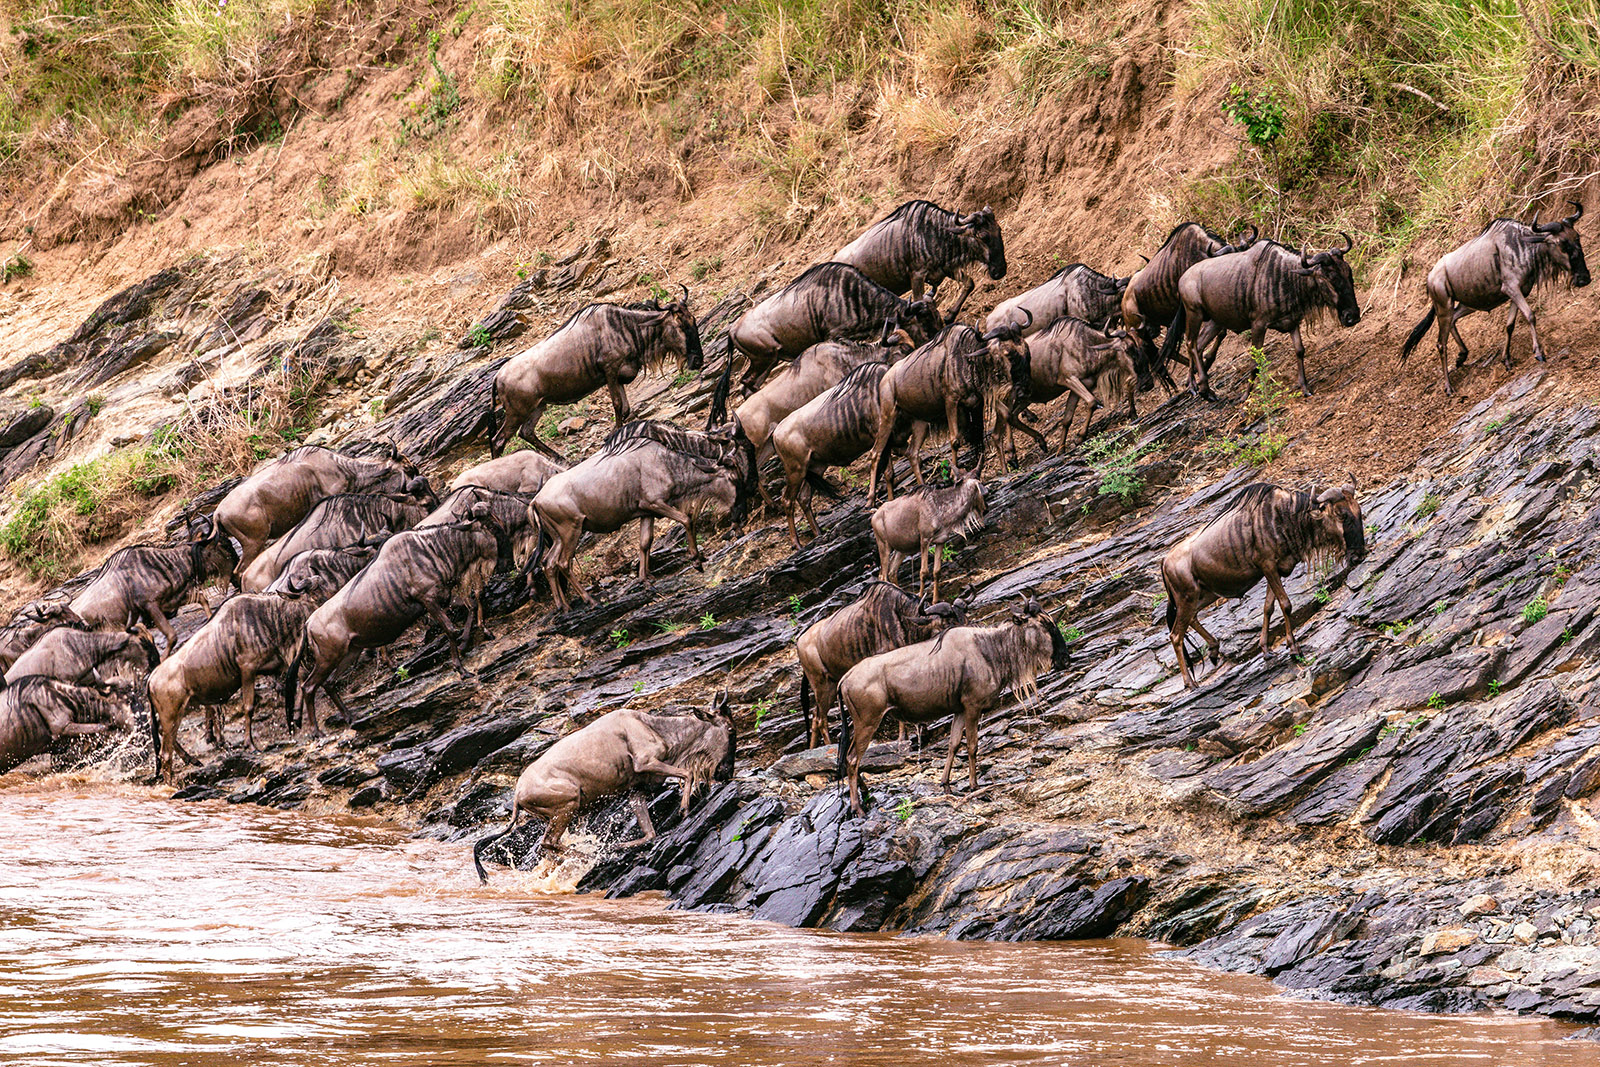 Wildebeest crossing a river